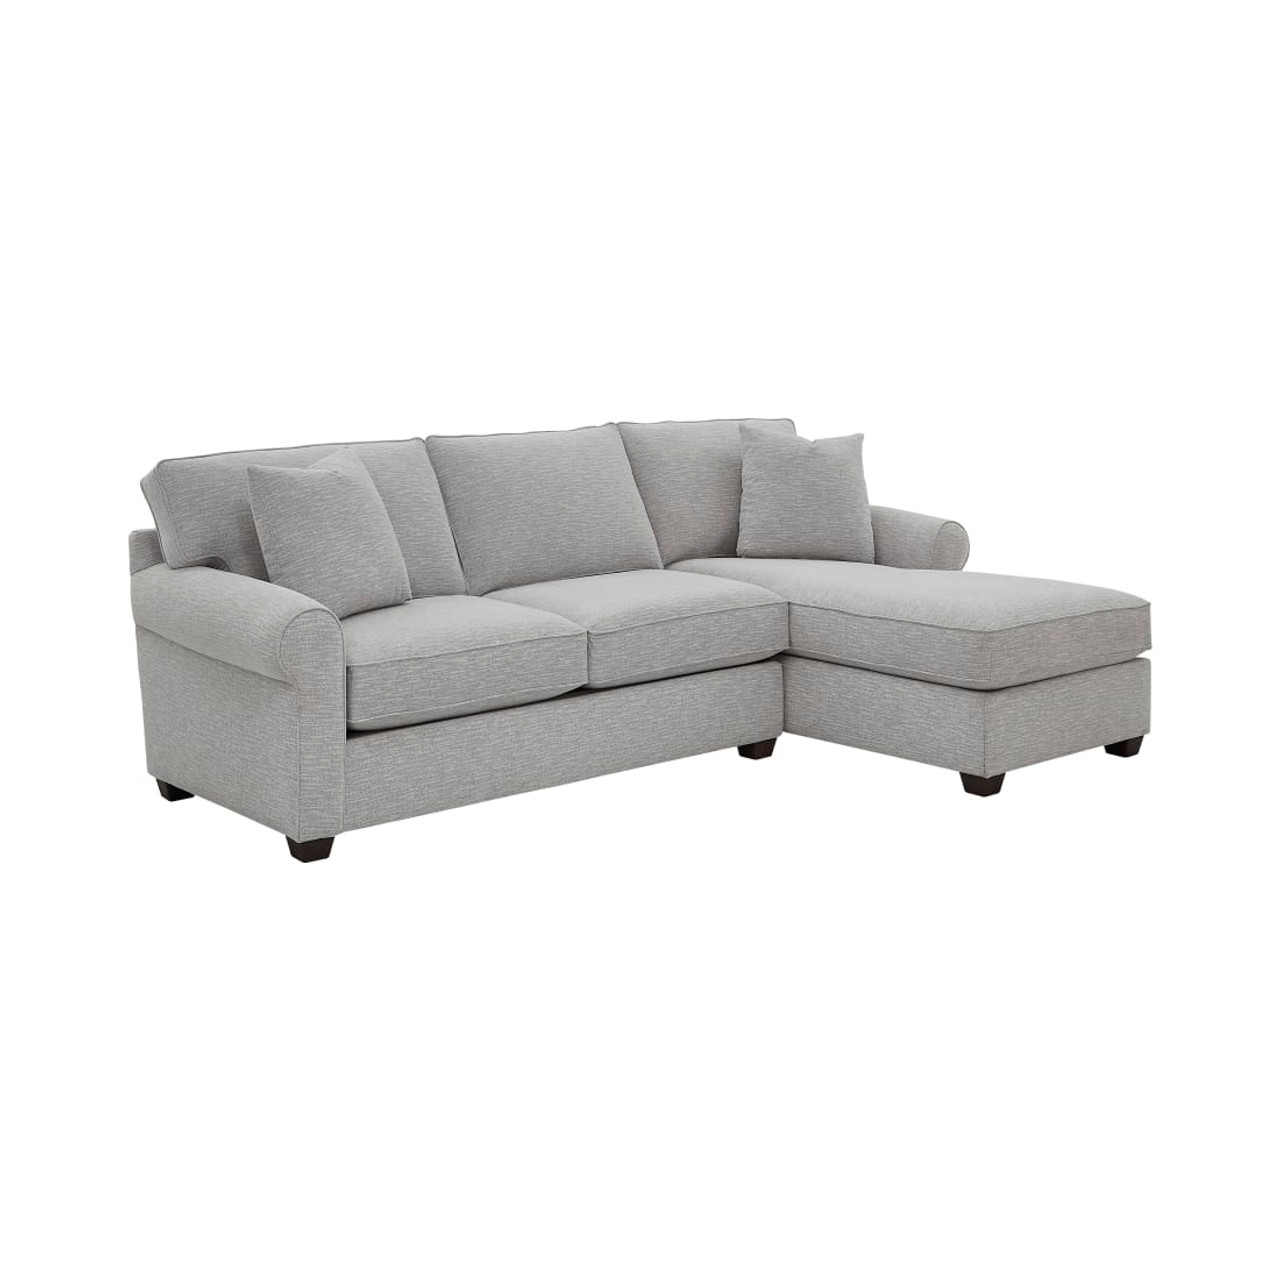 Crestview Rolled Arm Granite 2-pc sectional w/ right chaise